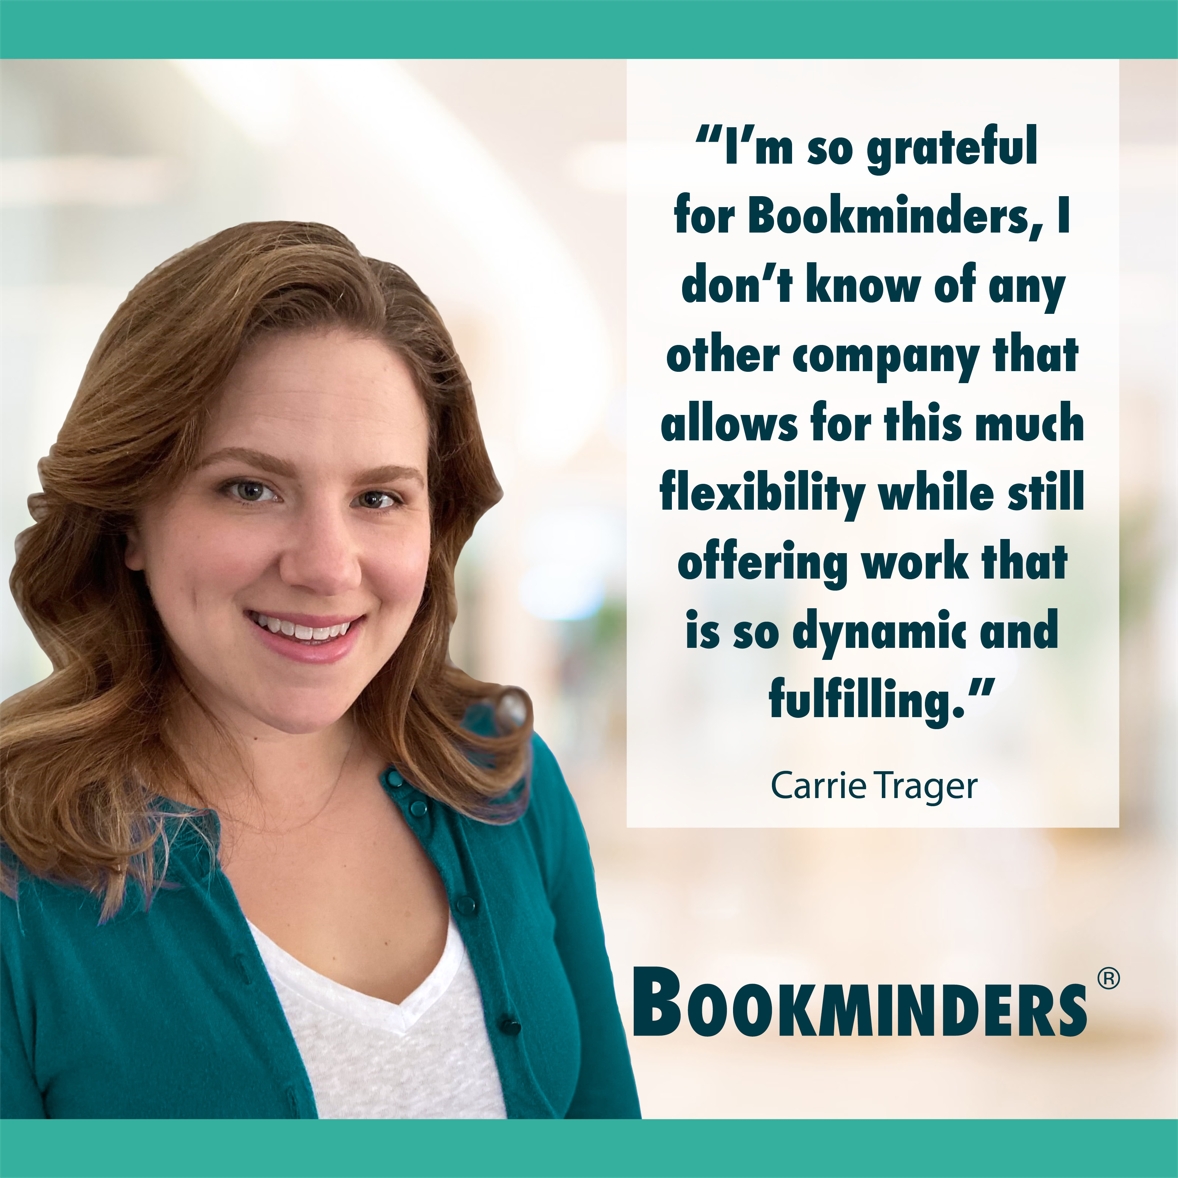 I'm so grateful for Bookminders, I don't know of any other company that allows this much flexibility while still offering work that is so dynamic and fulfilling.